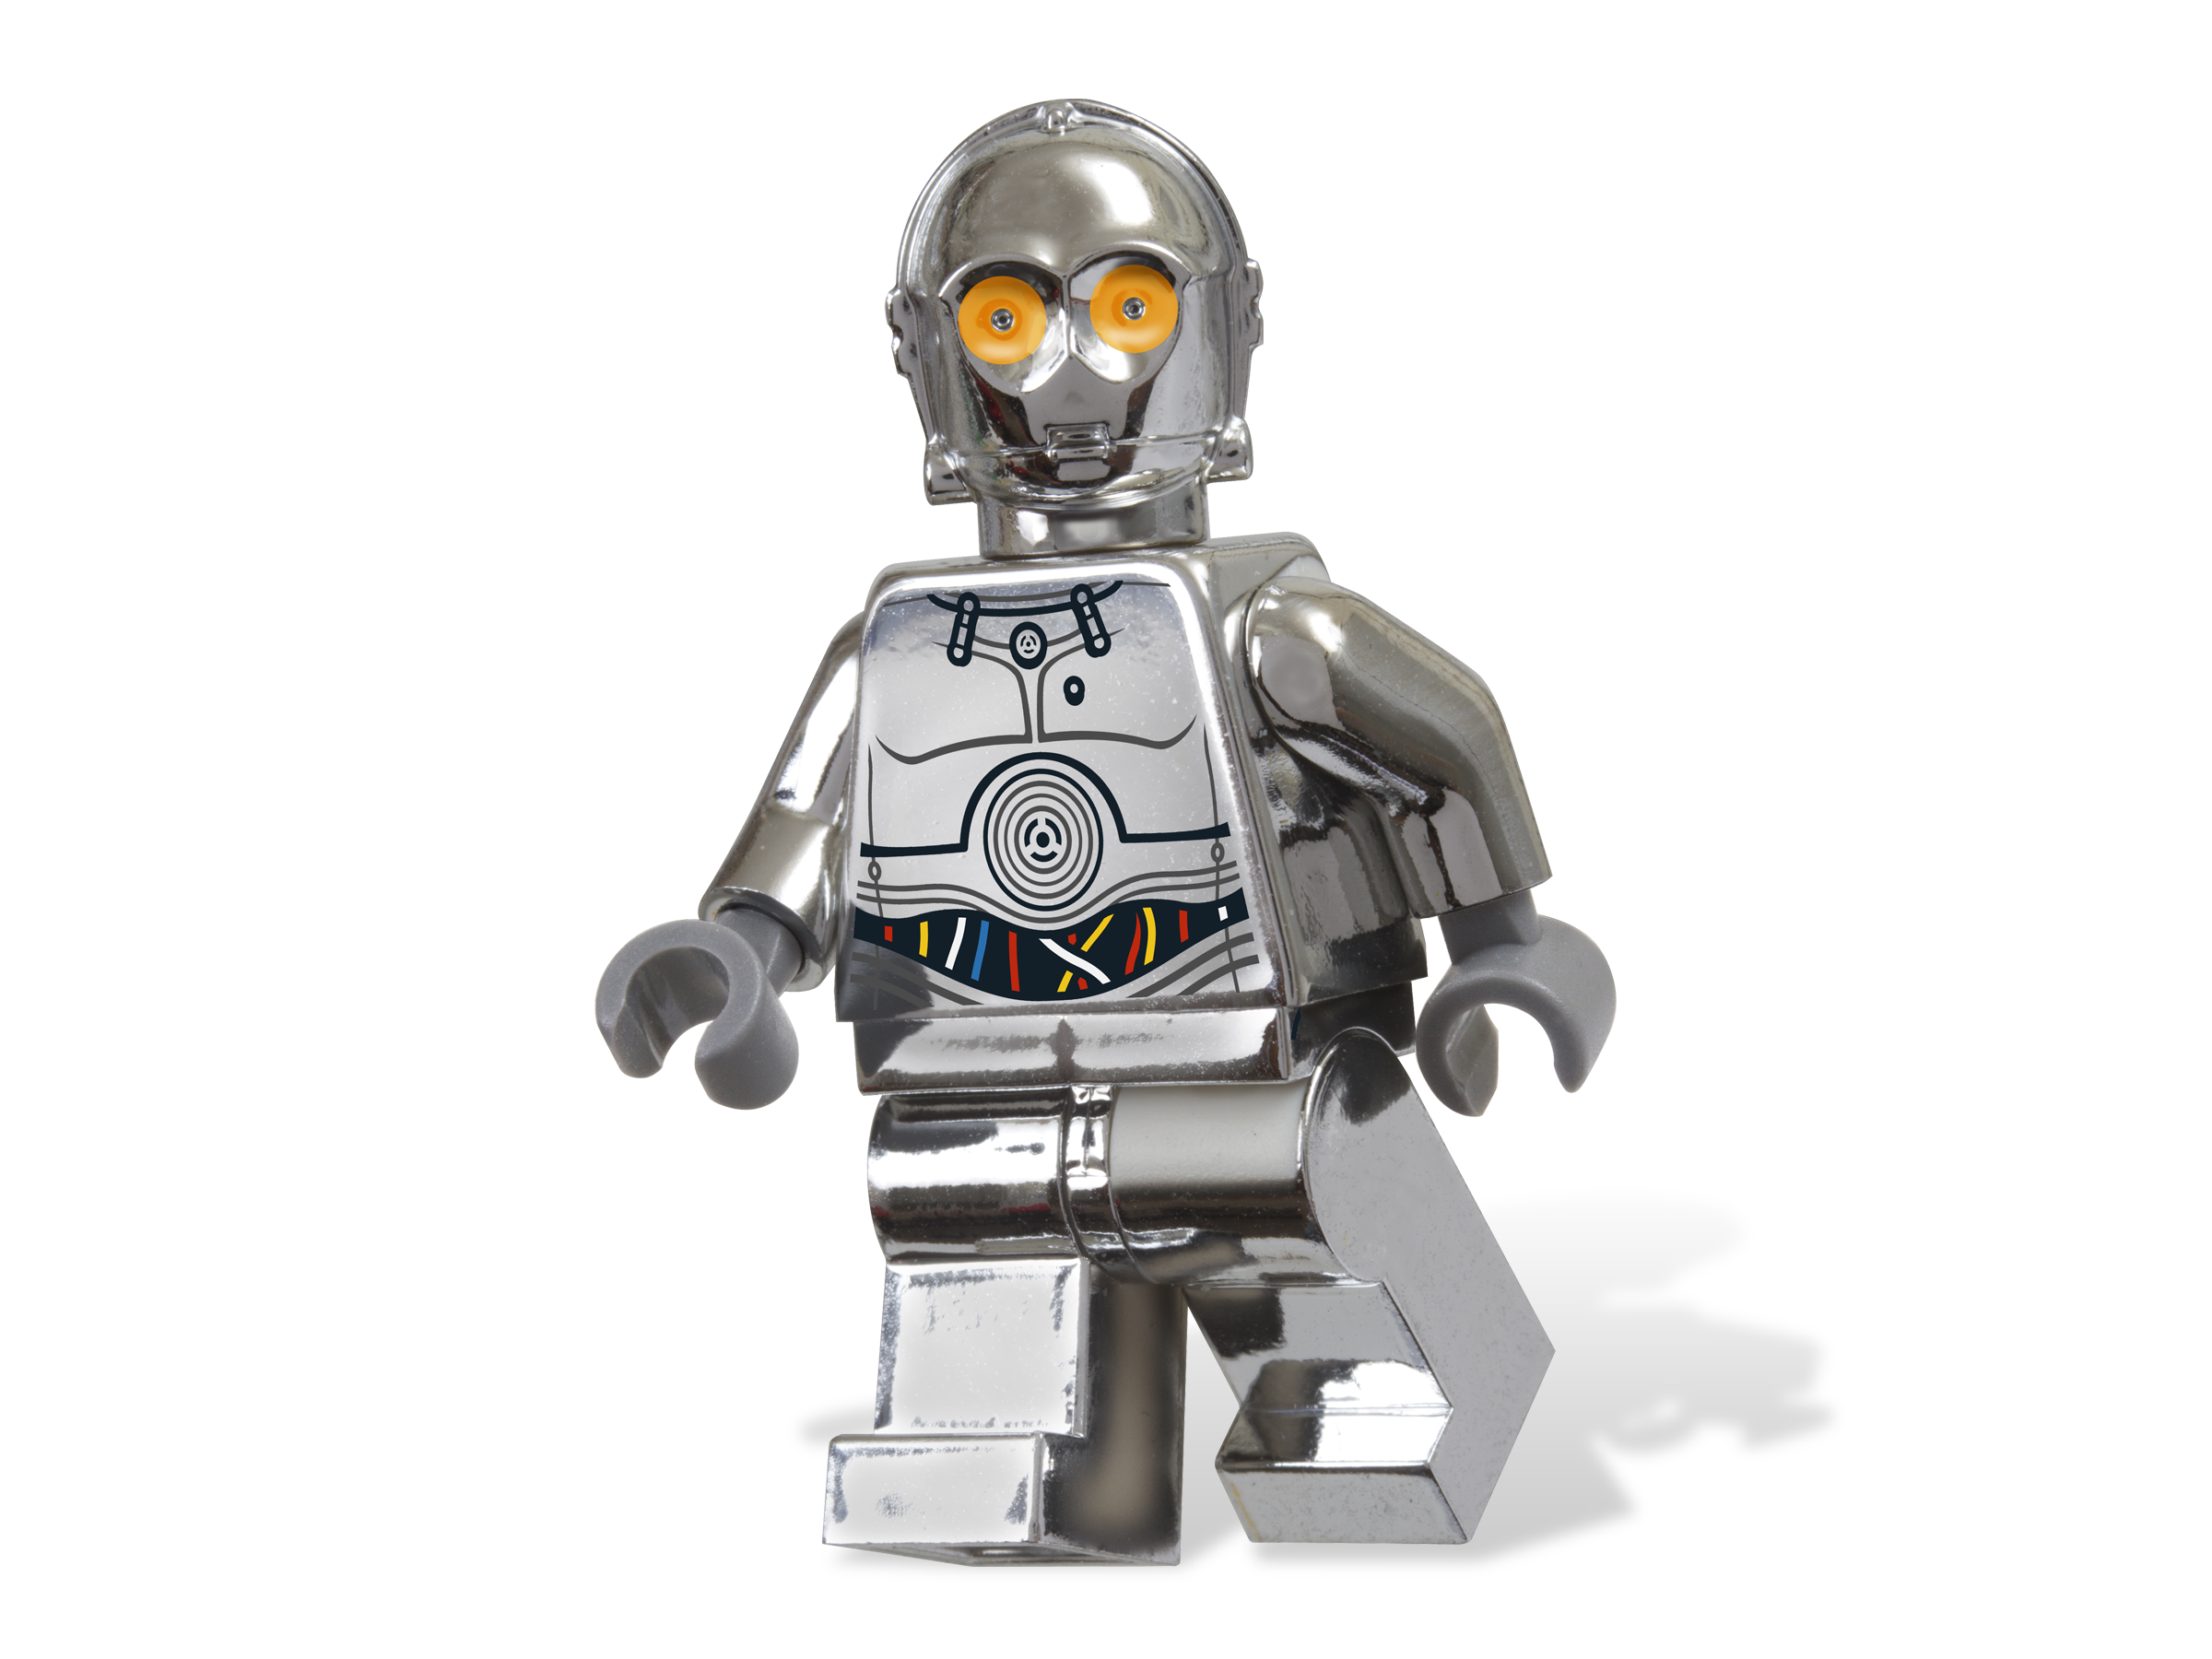 Lego Star Wars minifigure Silver C-3PO Droid TC-14  From 75146 